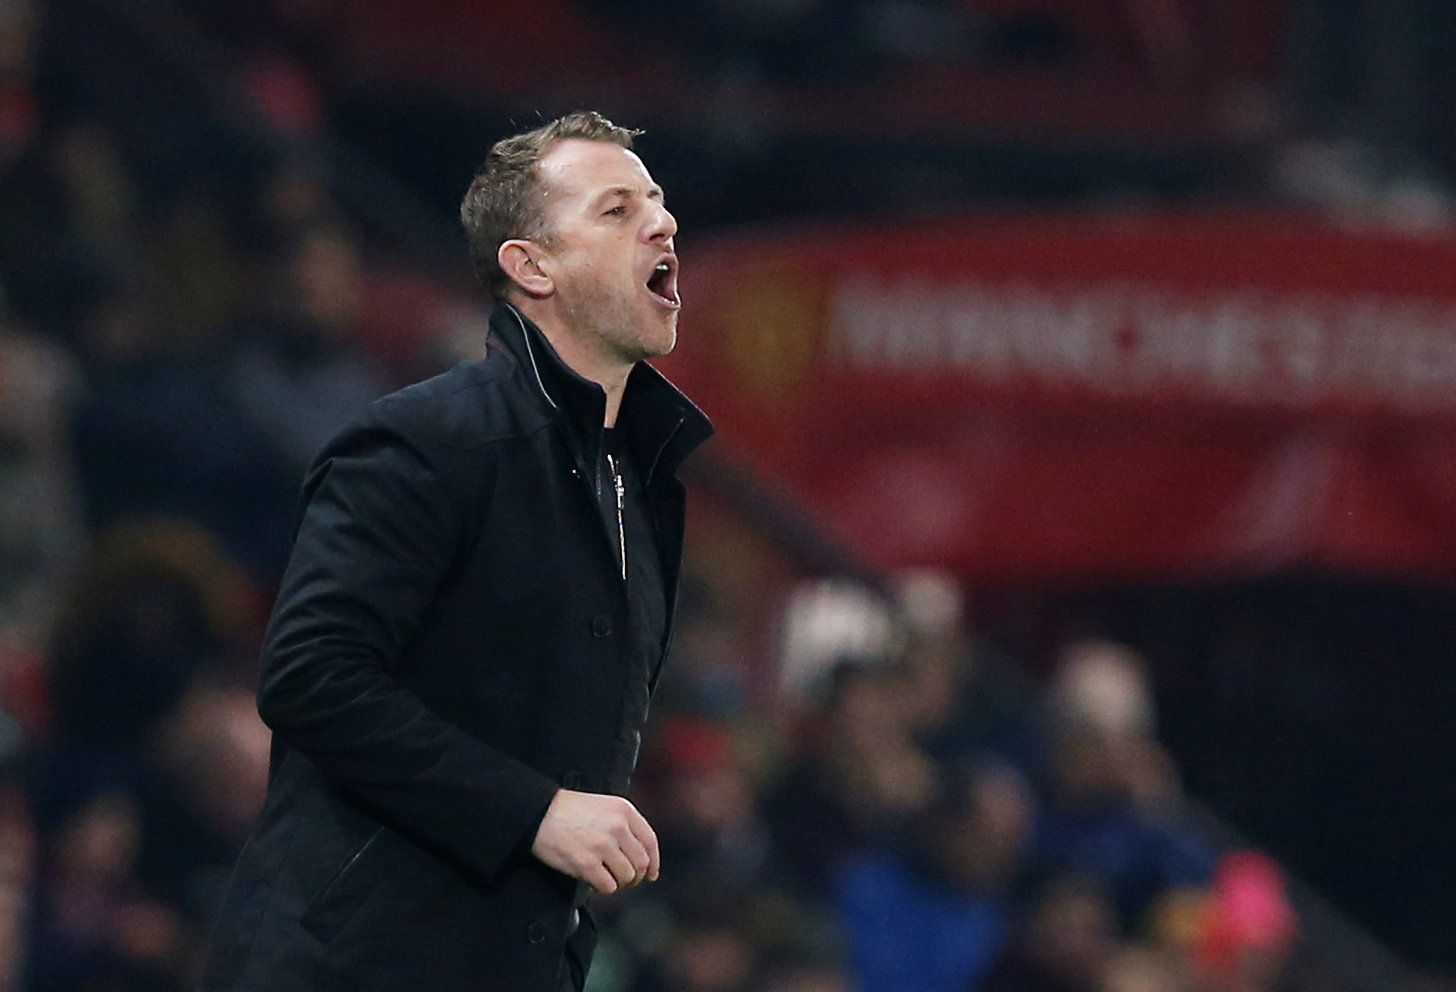 Soccer Football - FA Cup Third Round - Manchester United vs Derby County - Old Trafford, Manchester, Britain - January 5, 2018   Derby County manager Gary Rowett   REUTERS/Andrew Yates